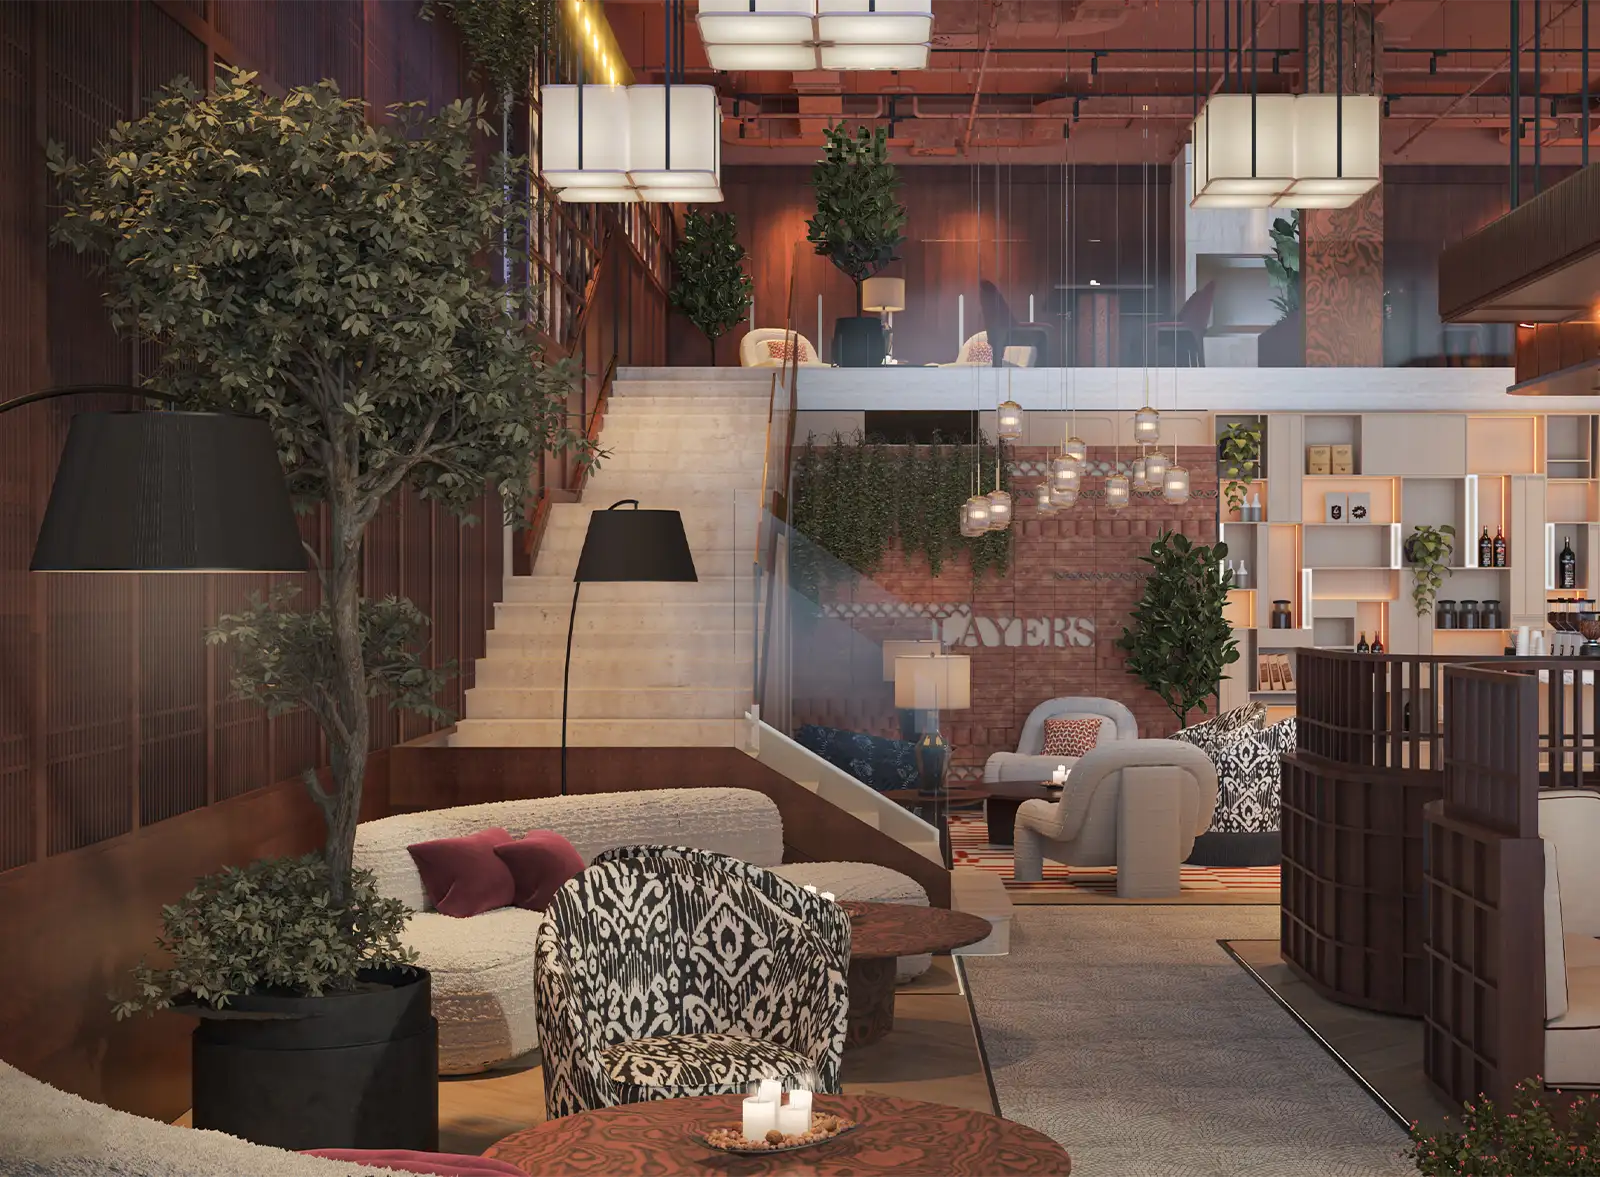 Urban-chic loft space with an open-concept design, featuring exposed ceiling beams, a mix of industrial and botanical elements, cozy seating areas with patterned armchairs, and pendant lighting, creating a warm and inviting atmosphere for both work and relaxation.